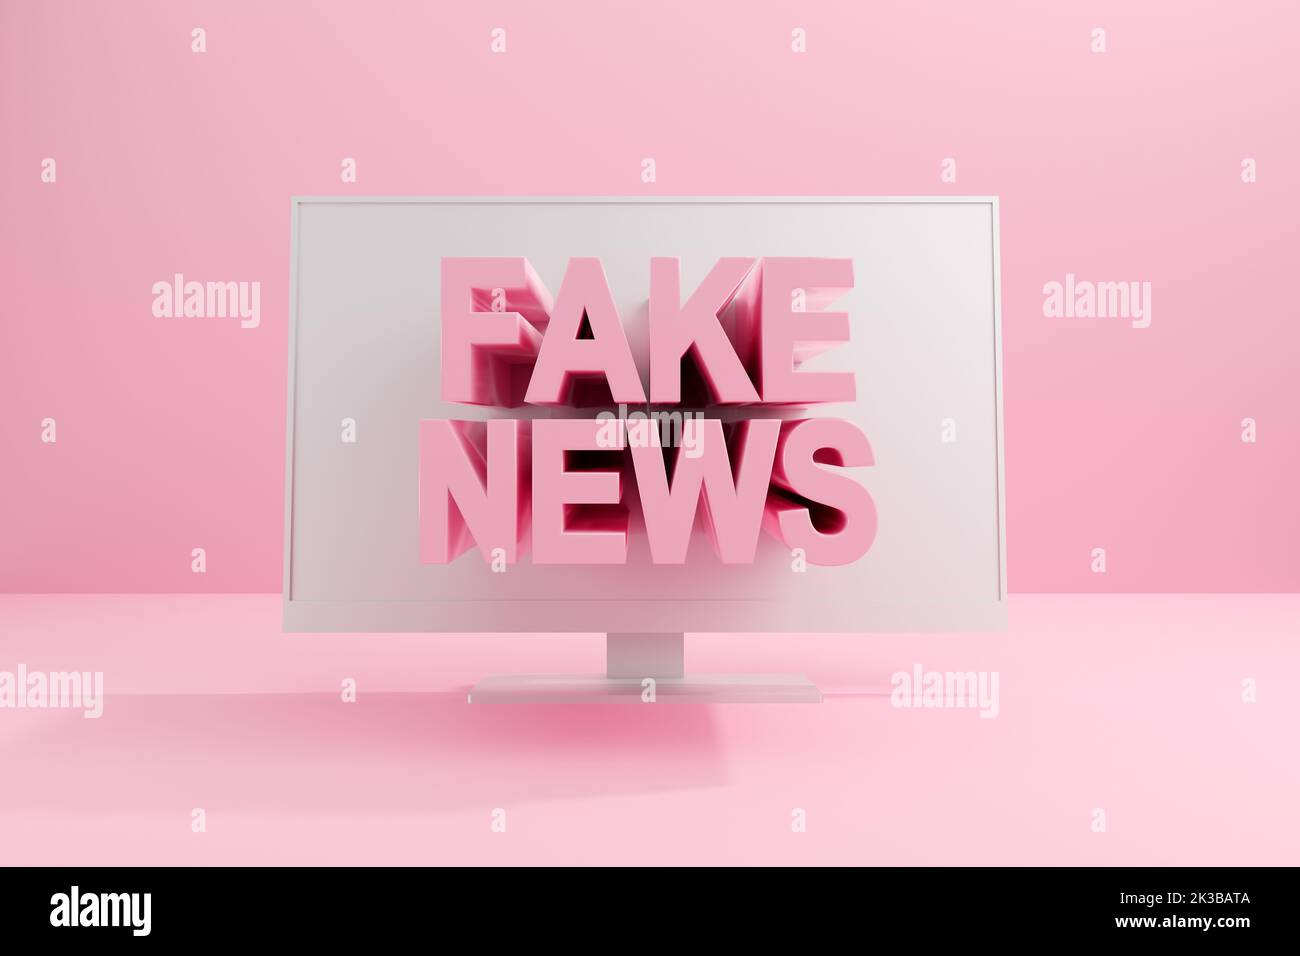 Fake news on the internet and cyberspace. The word FAKE NEWS popping out from the pc computer screen. 3D rendering. Stock Photo